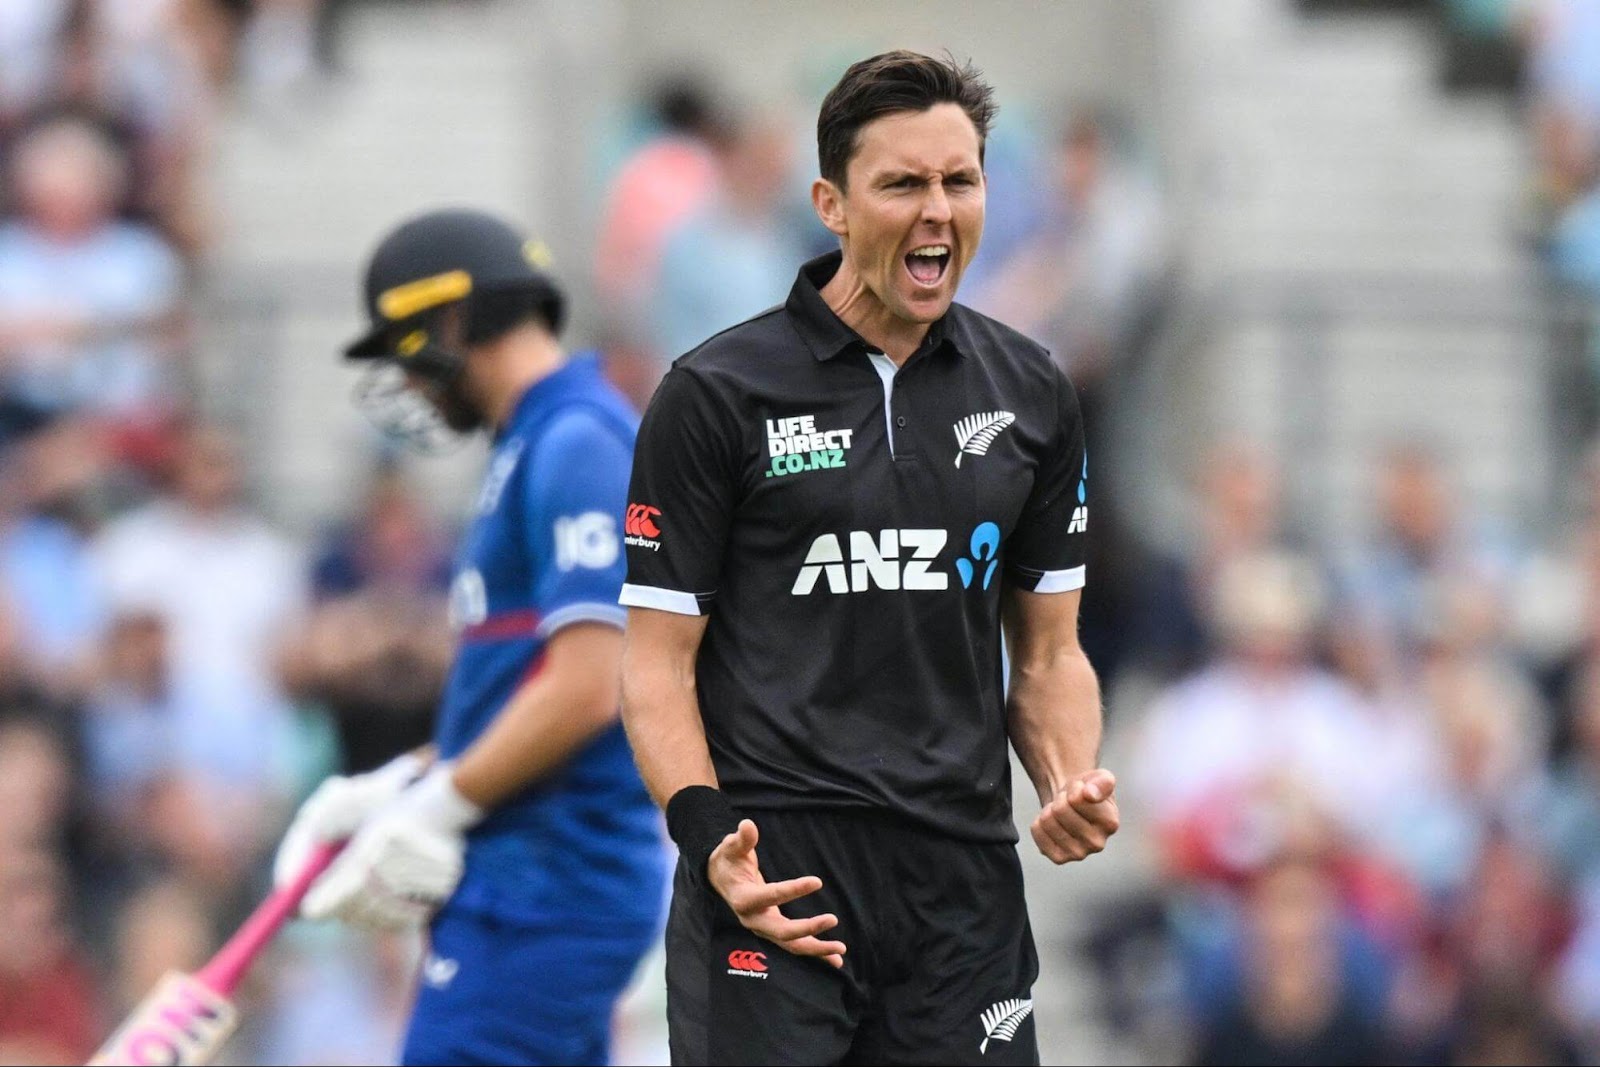 Boult is ecstatic after taking yet another wicket